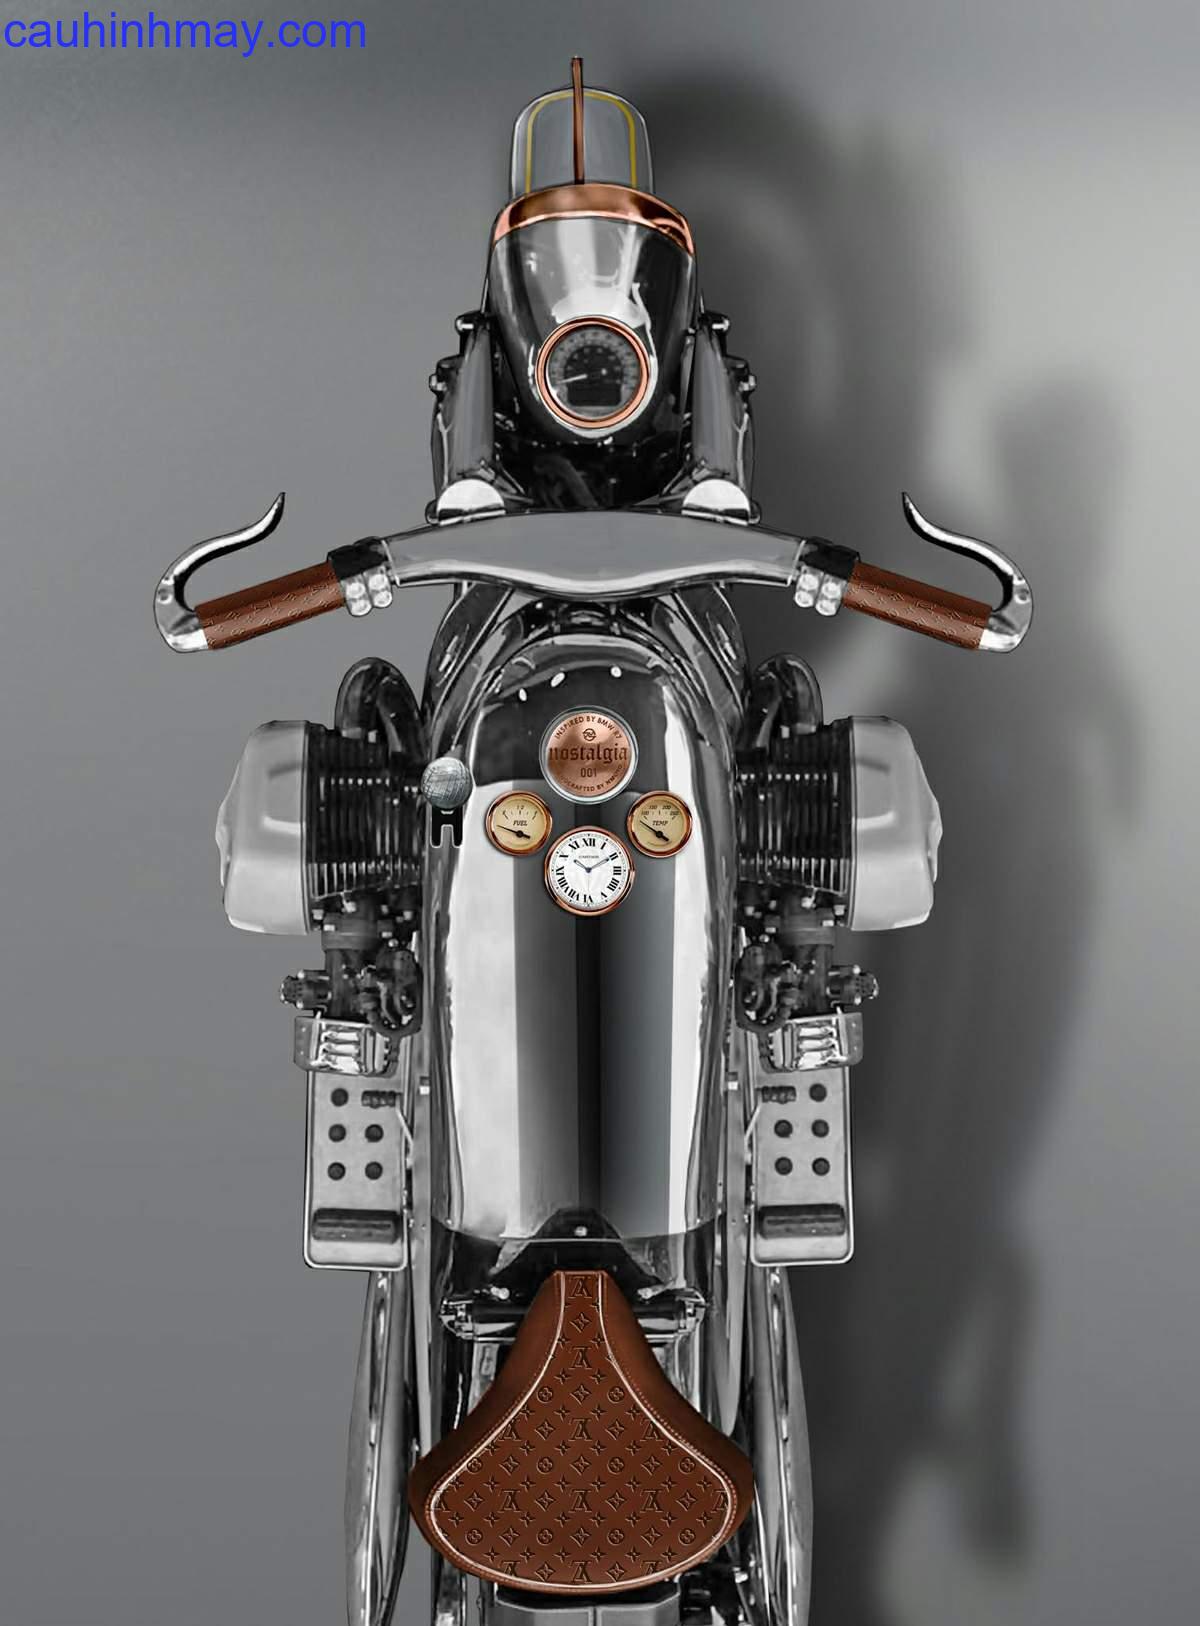 BMW R NINET R7 85TH ANNIVERSARY COMMEMORATION LIMITED EDITION BY NMOTO - cauhinhmay.com